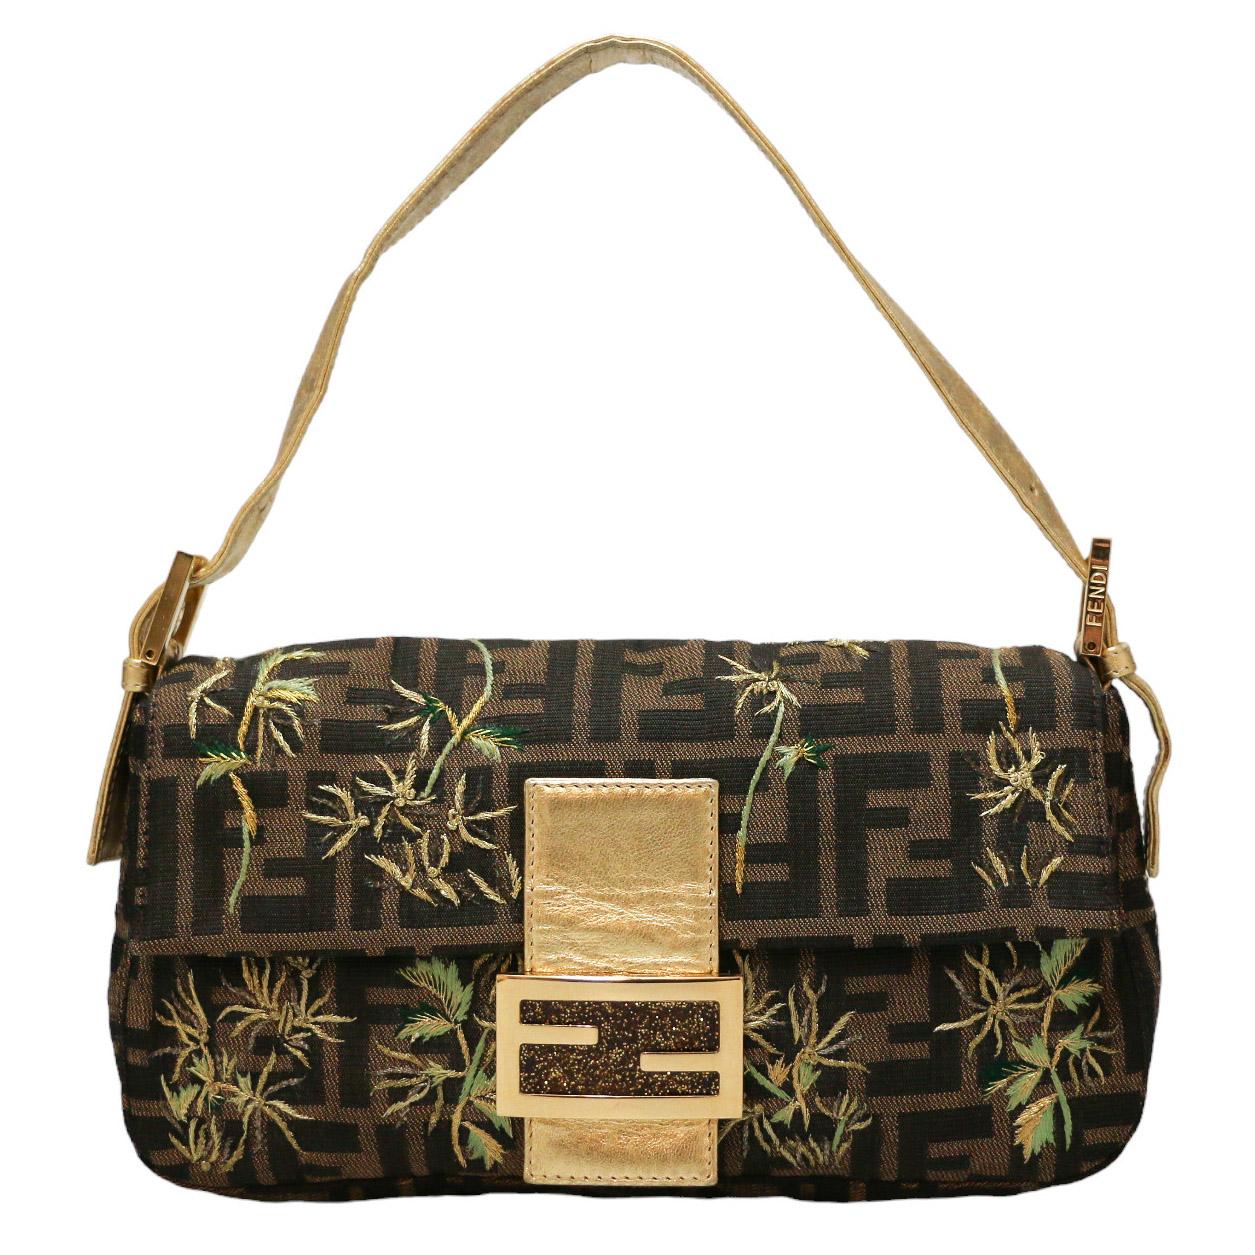 Wonderful Fendi baguette bag with monogram and flower embroidery

Condition: excellent
Made in Italy
Collection: baguette
Genre: women
Materials: Zucca toile, leather pieces
Interior: blue satin
Color: brown monogram, golden and green